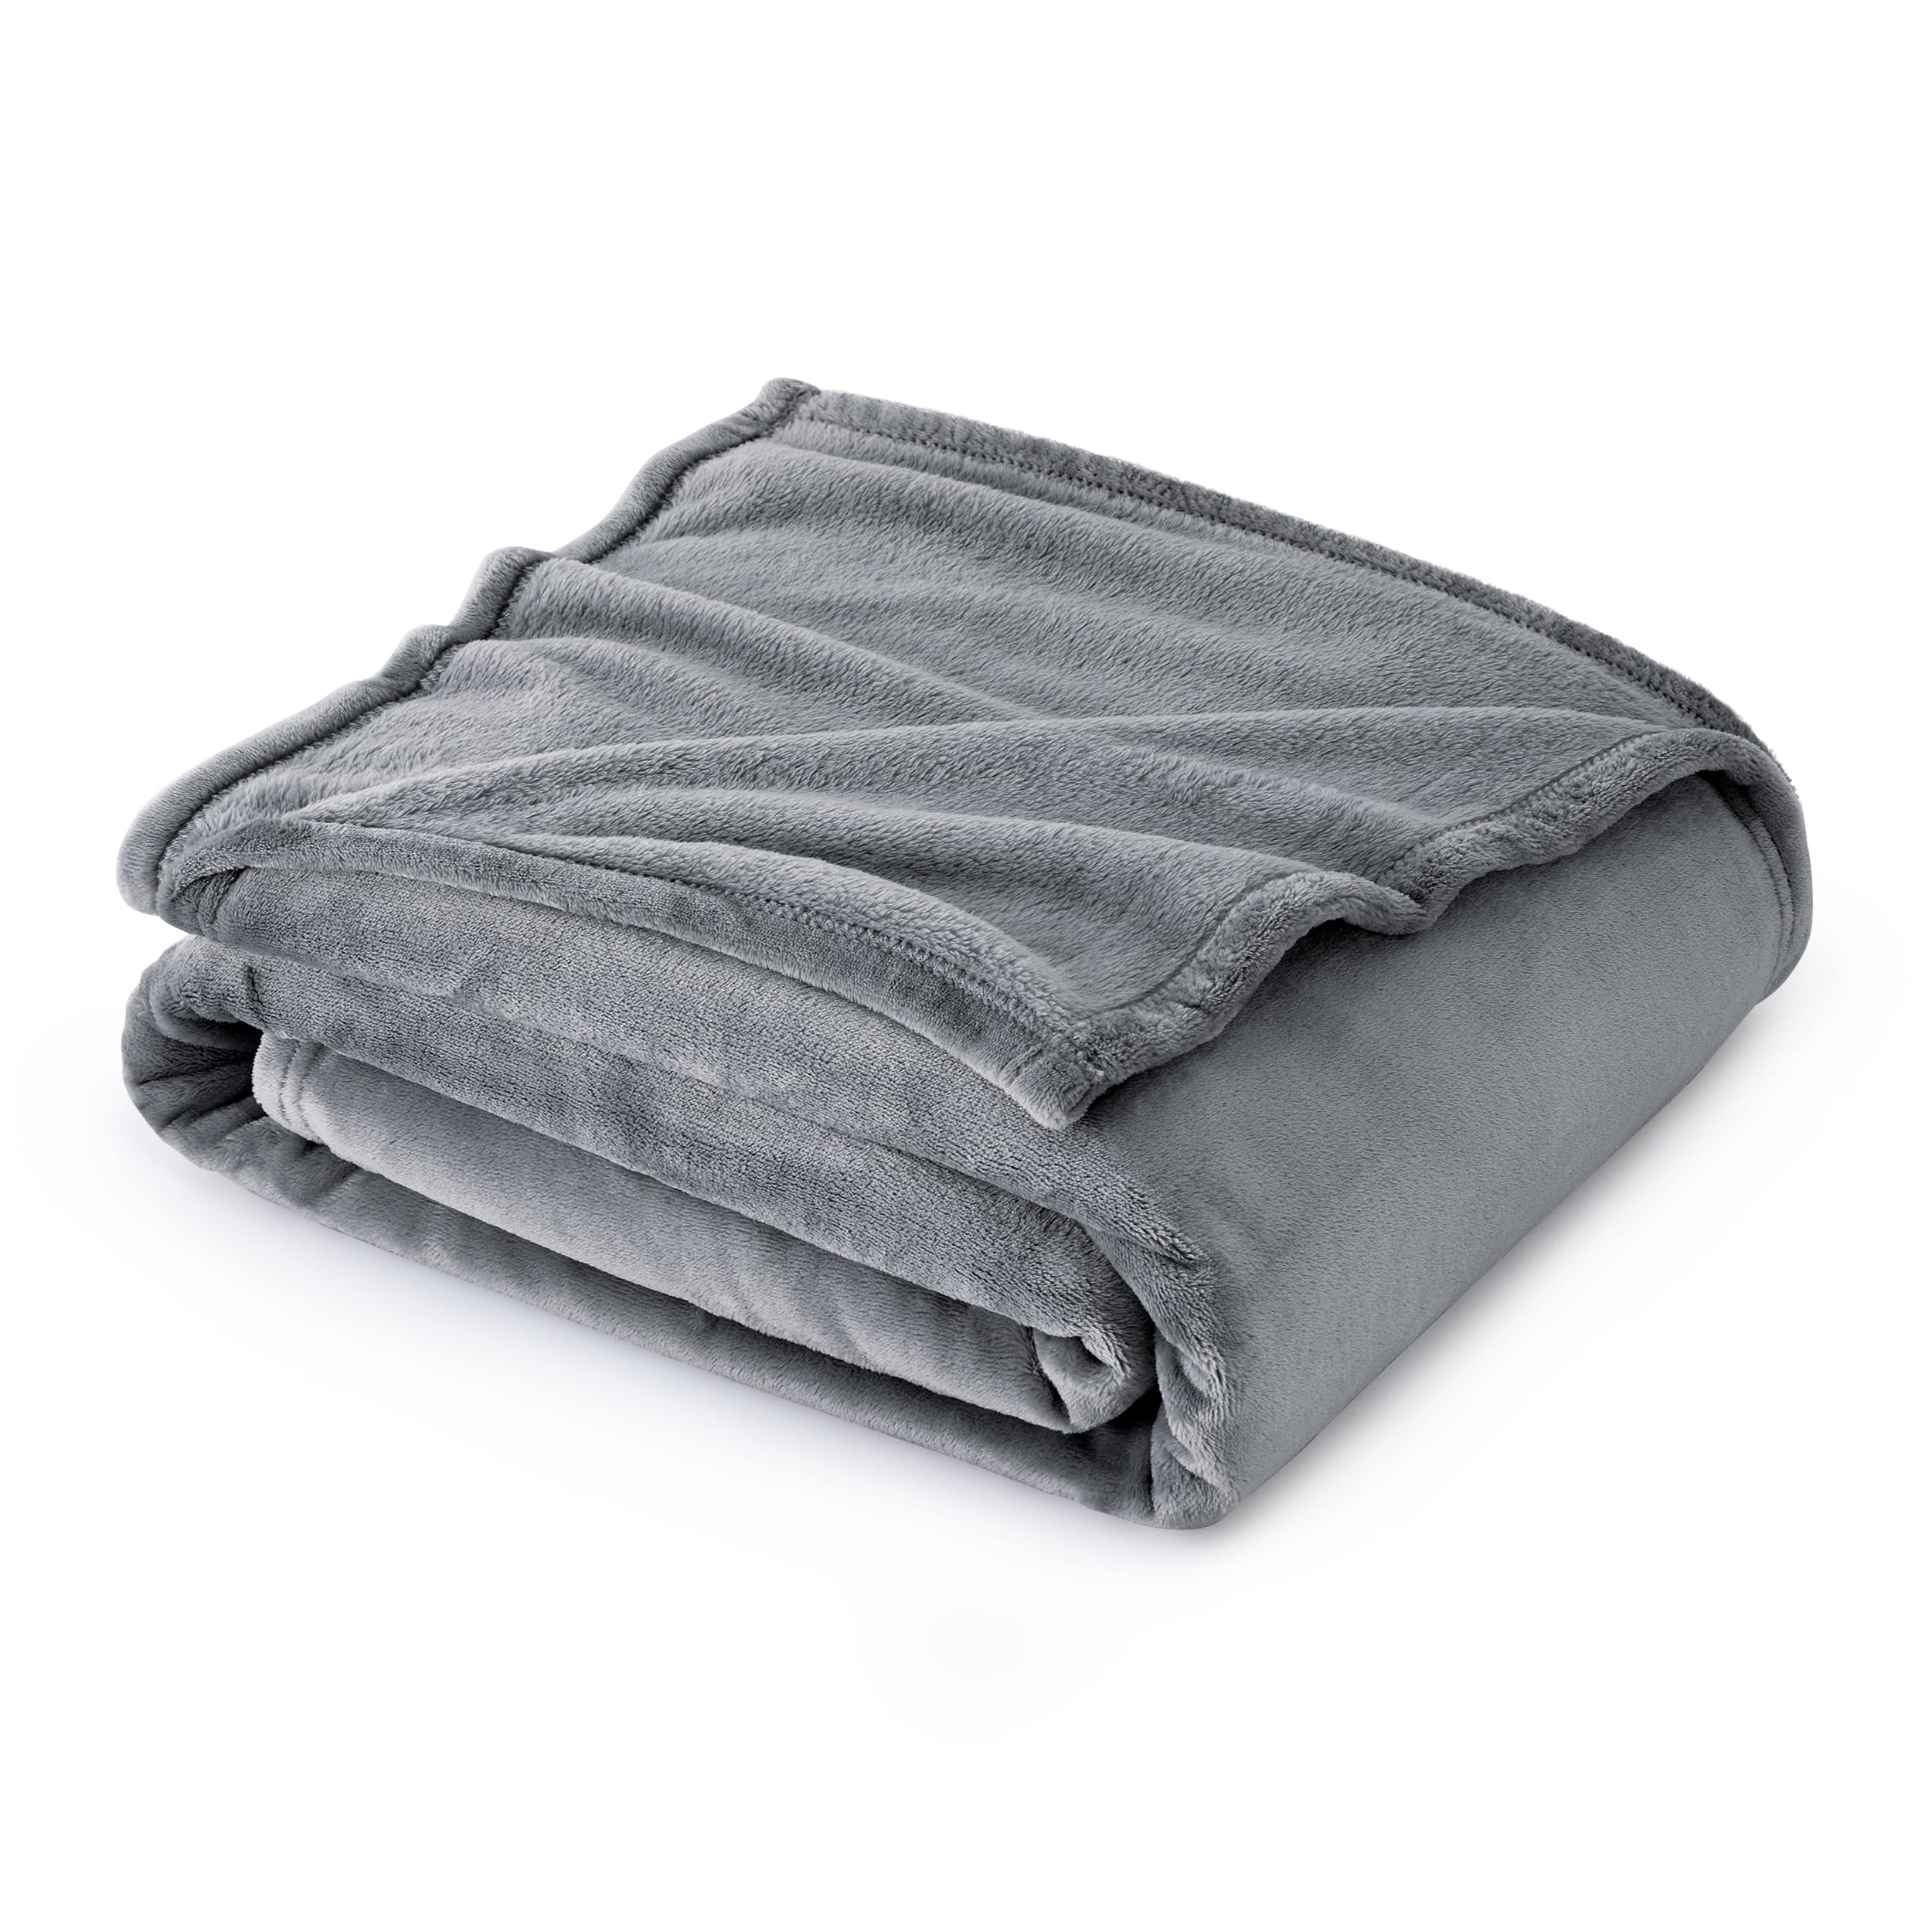 Book Cover Bedsure Fleece Blankets Twin Size Grey - 300GSM Lightweight Plush Fuzzy Cozy Soft Twin Blanket for Bed, Sofa, Couch, Travel, Camping, 60x80 inches Twin (60